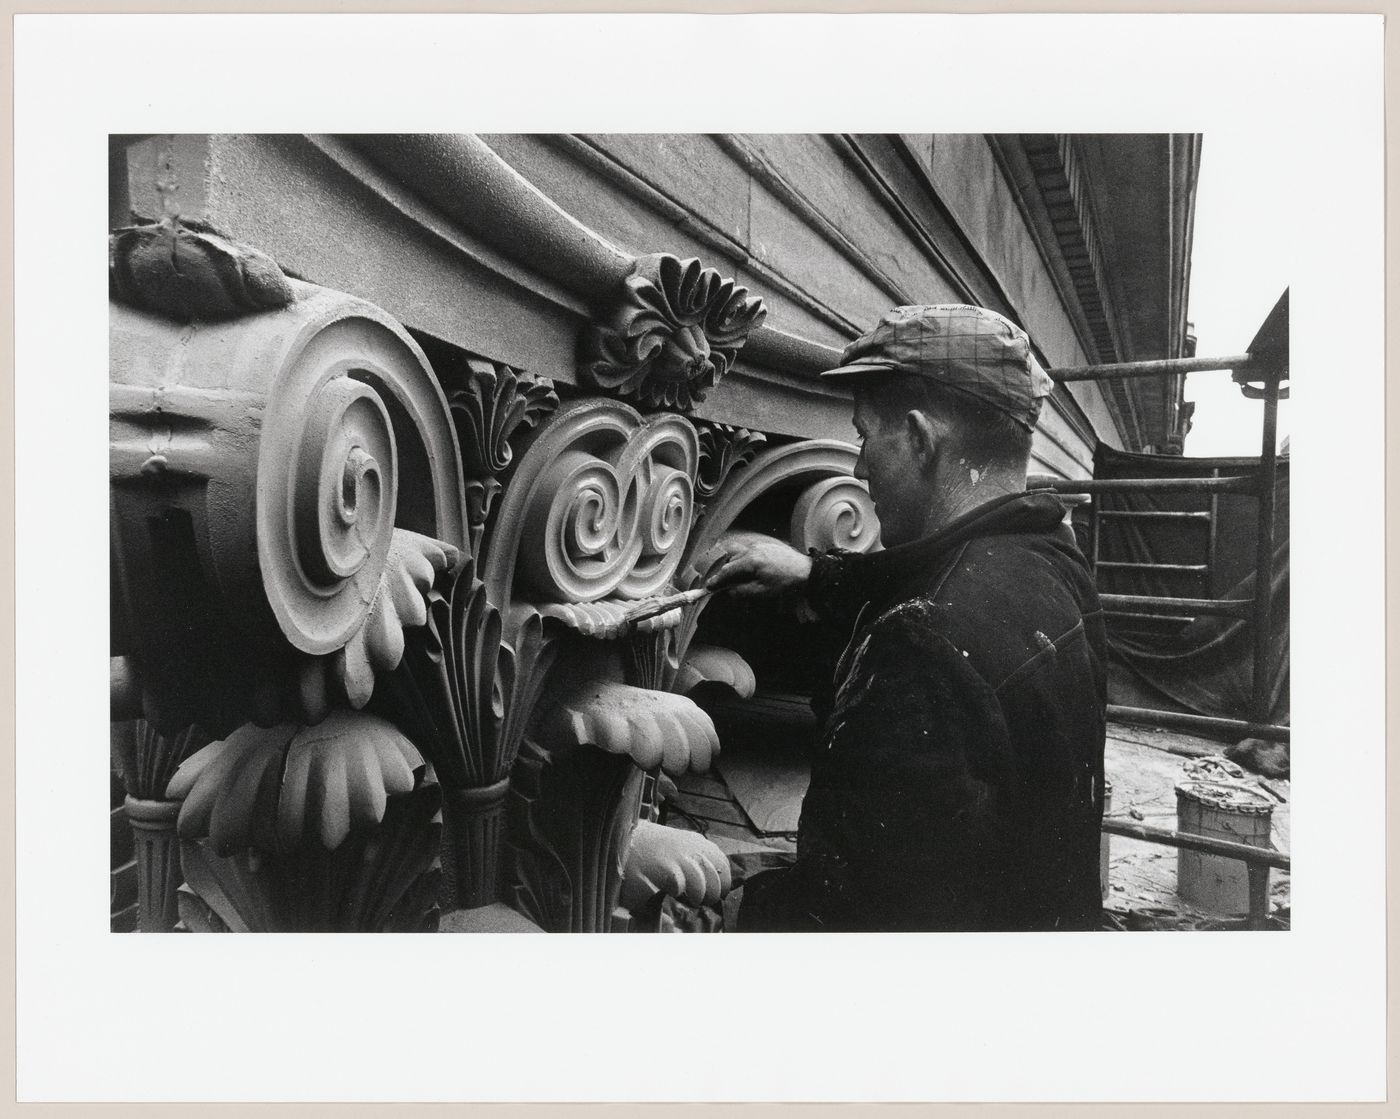 View of a worker brushing hypalon material onto the aluminium capital during the restoration of the Corinthian capitals of the principal façade of the Head Office of the Bank of Montréal, 119 rue Saint-Jacques, Montréal, Québec